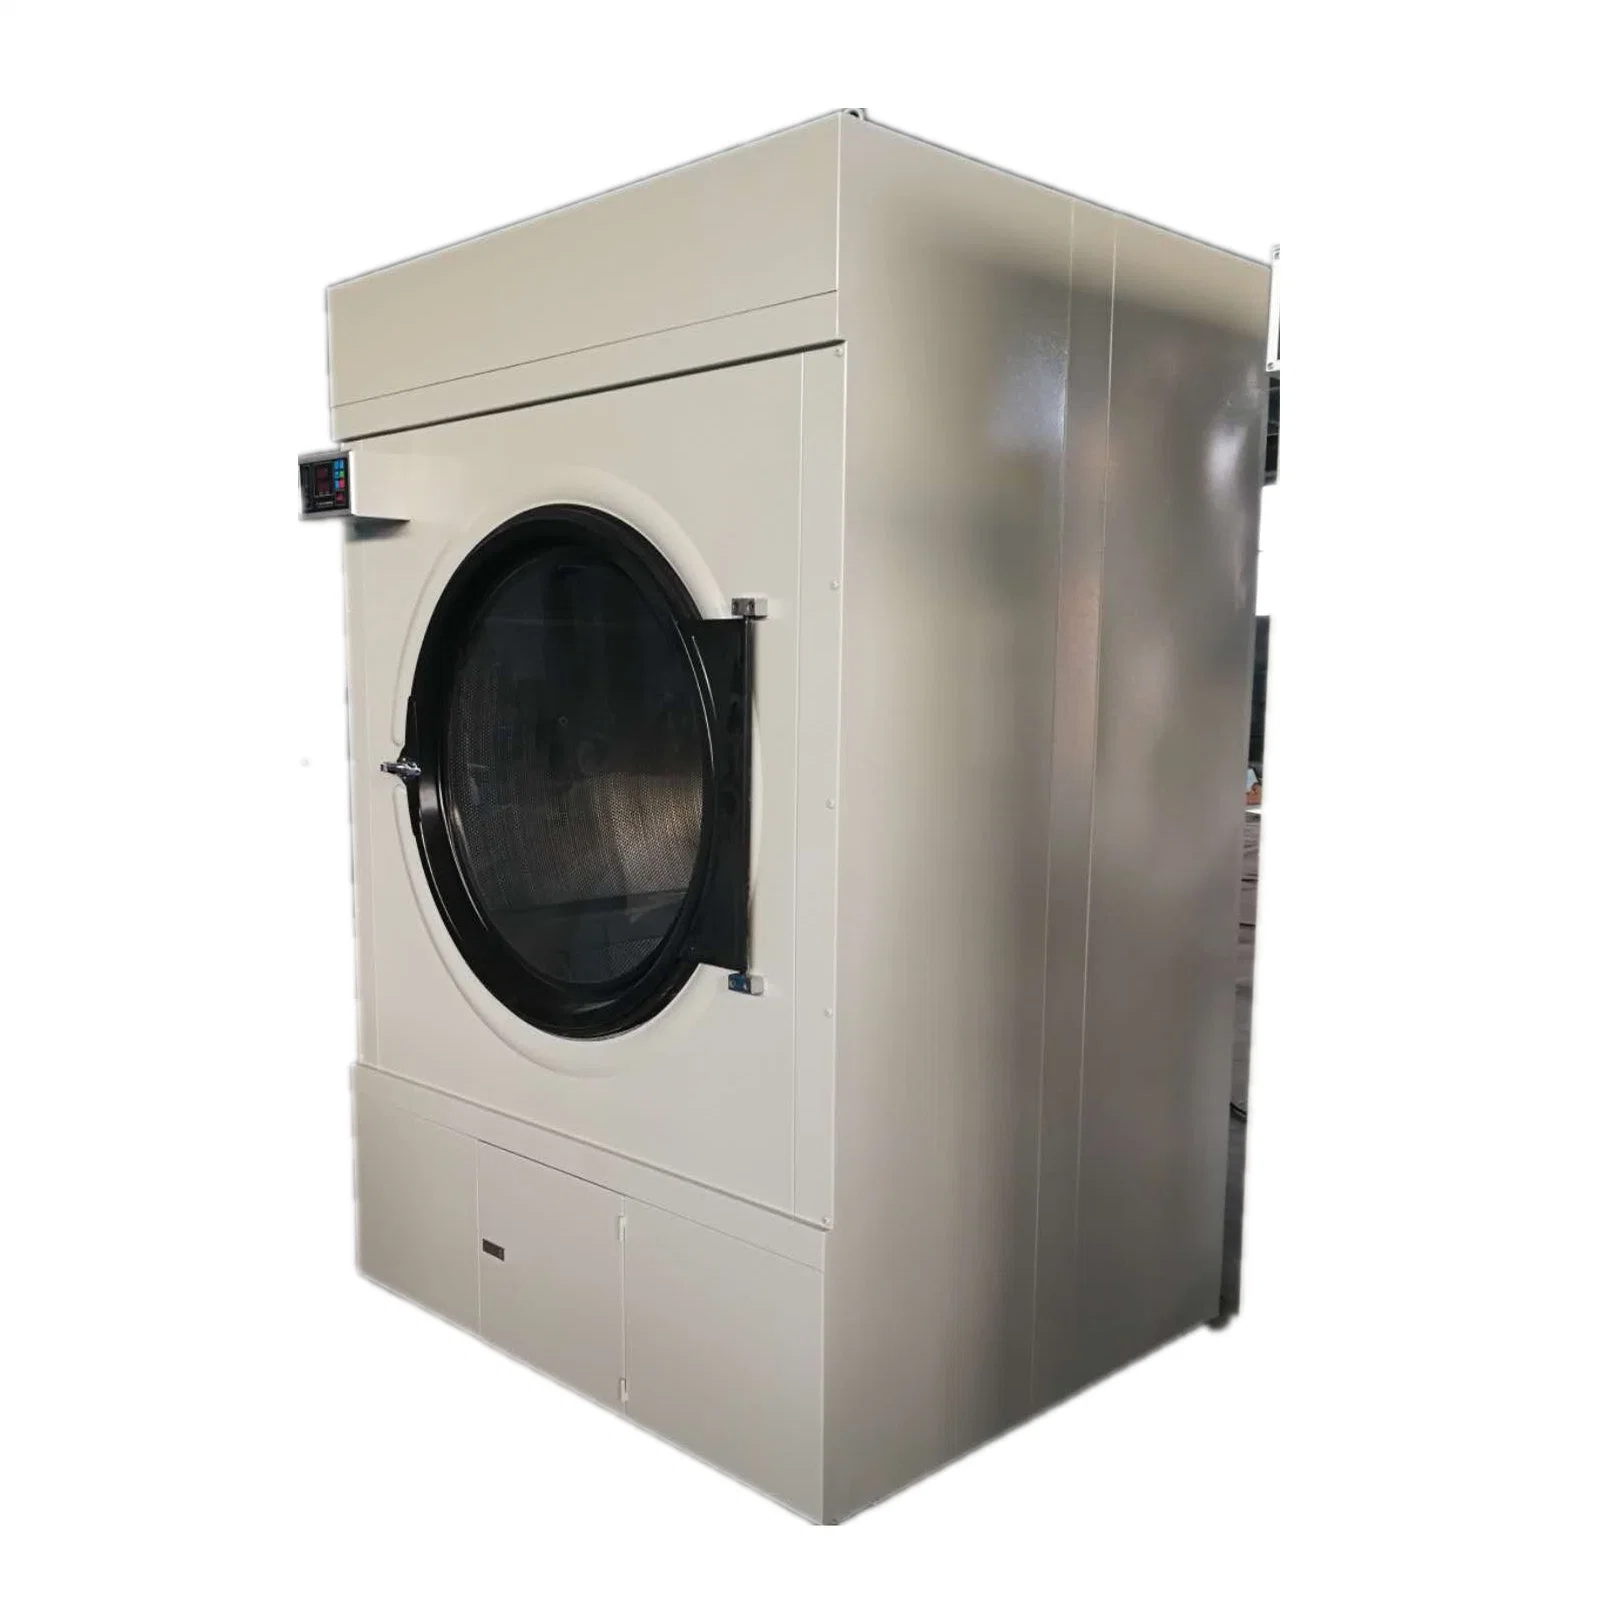 Industrial Big Stainless Steel Hotel Laundry Tumble Dryer Price